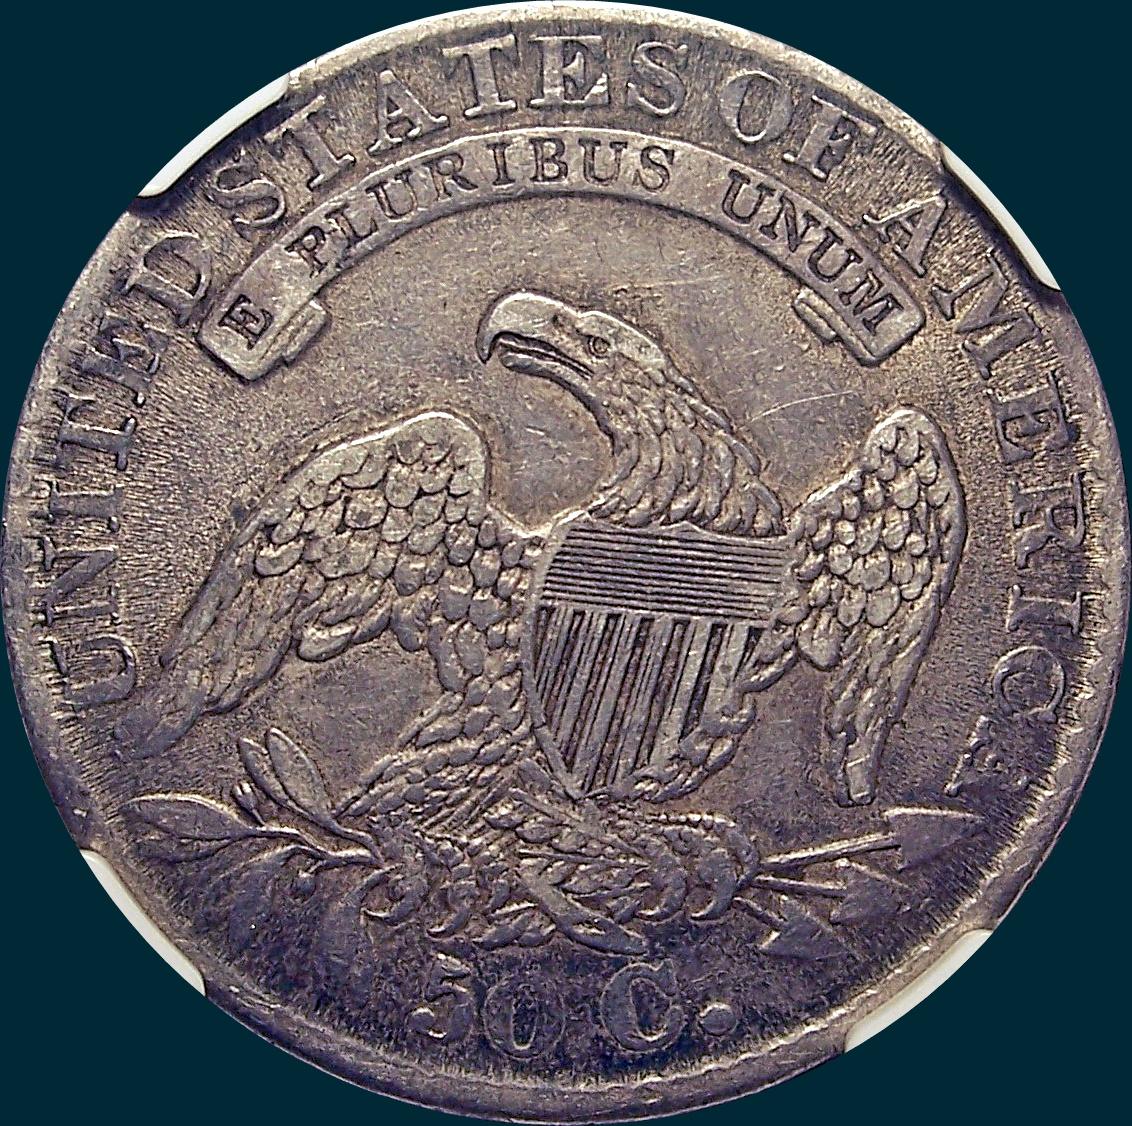 1832, O-105a, Small Letters, Capped Bust, Half Dollar